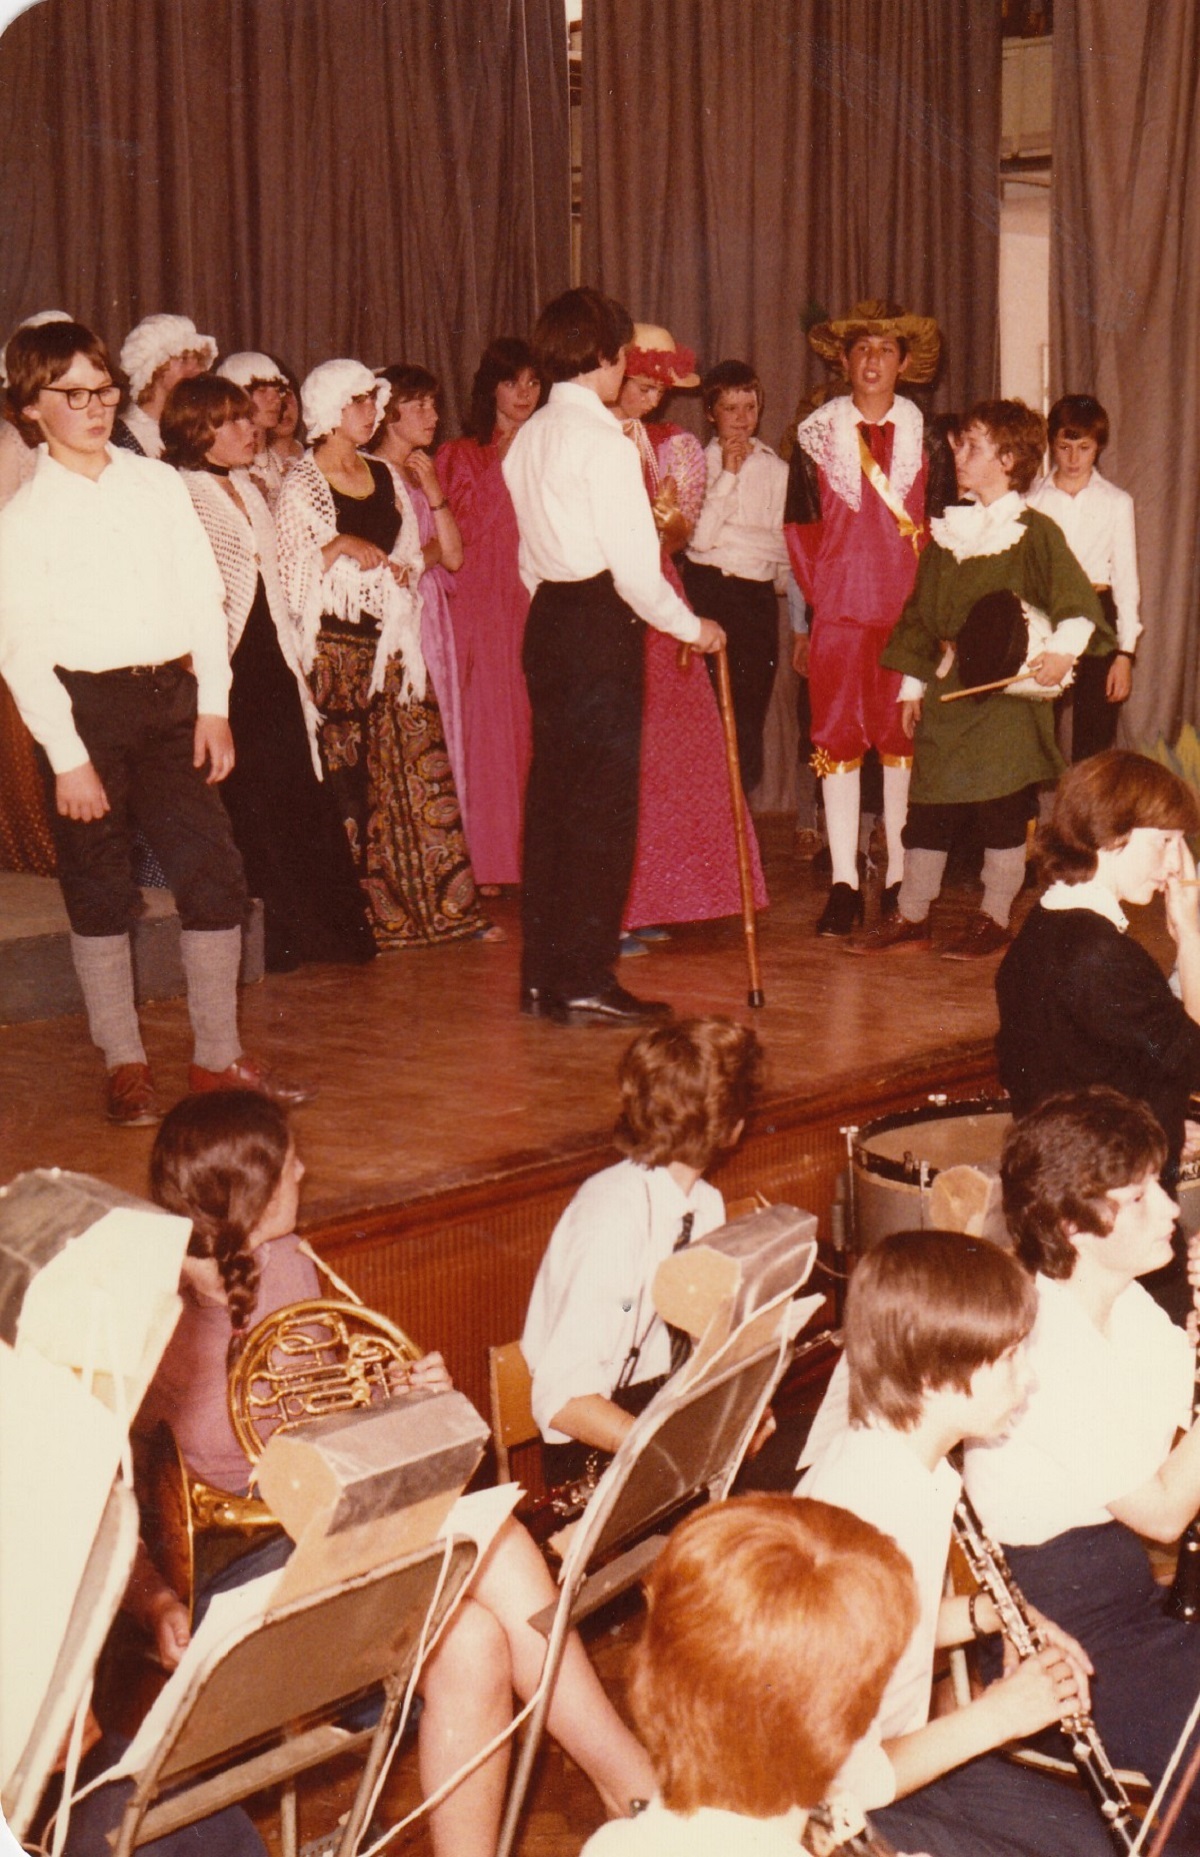 As a matter of act - this picture was taken during a performance of All the Kings Men, in 1981